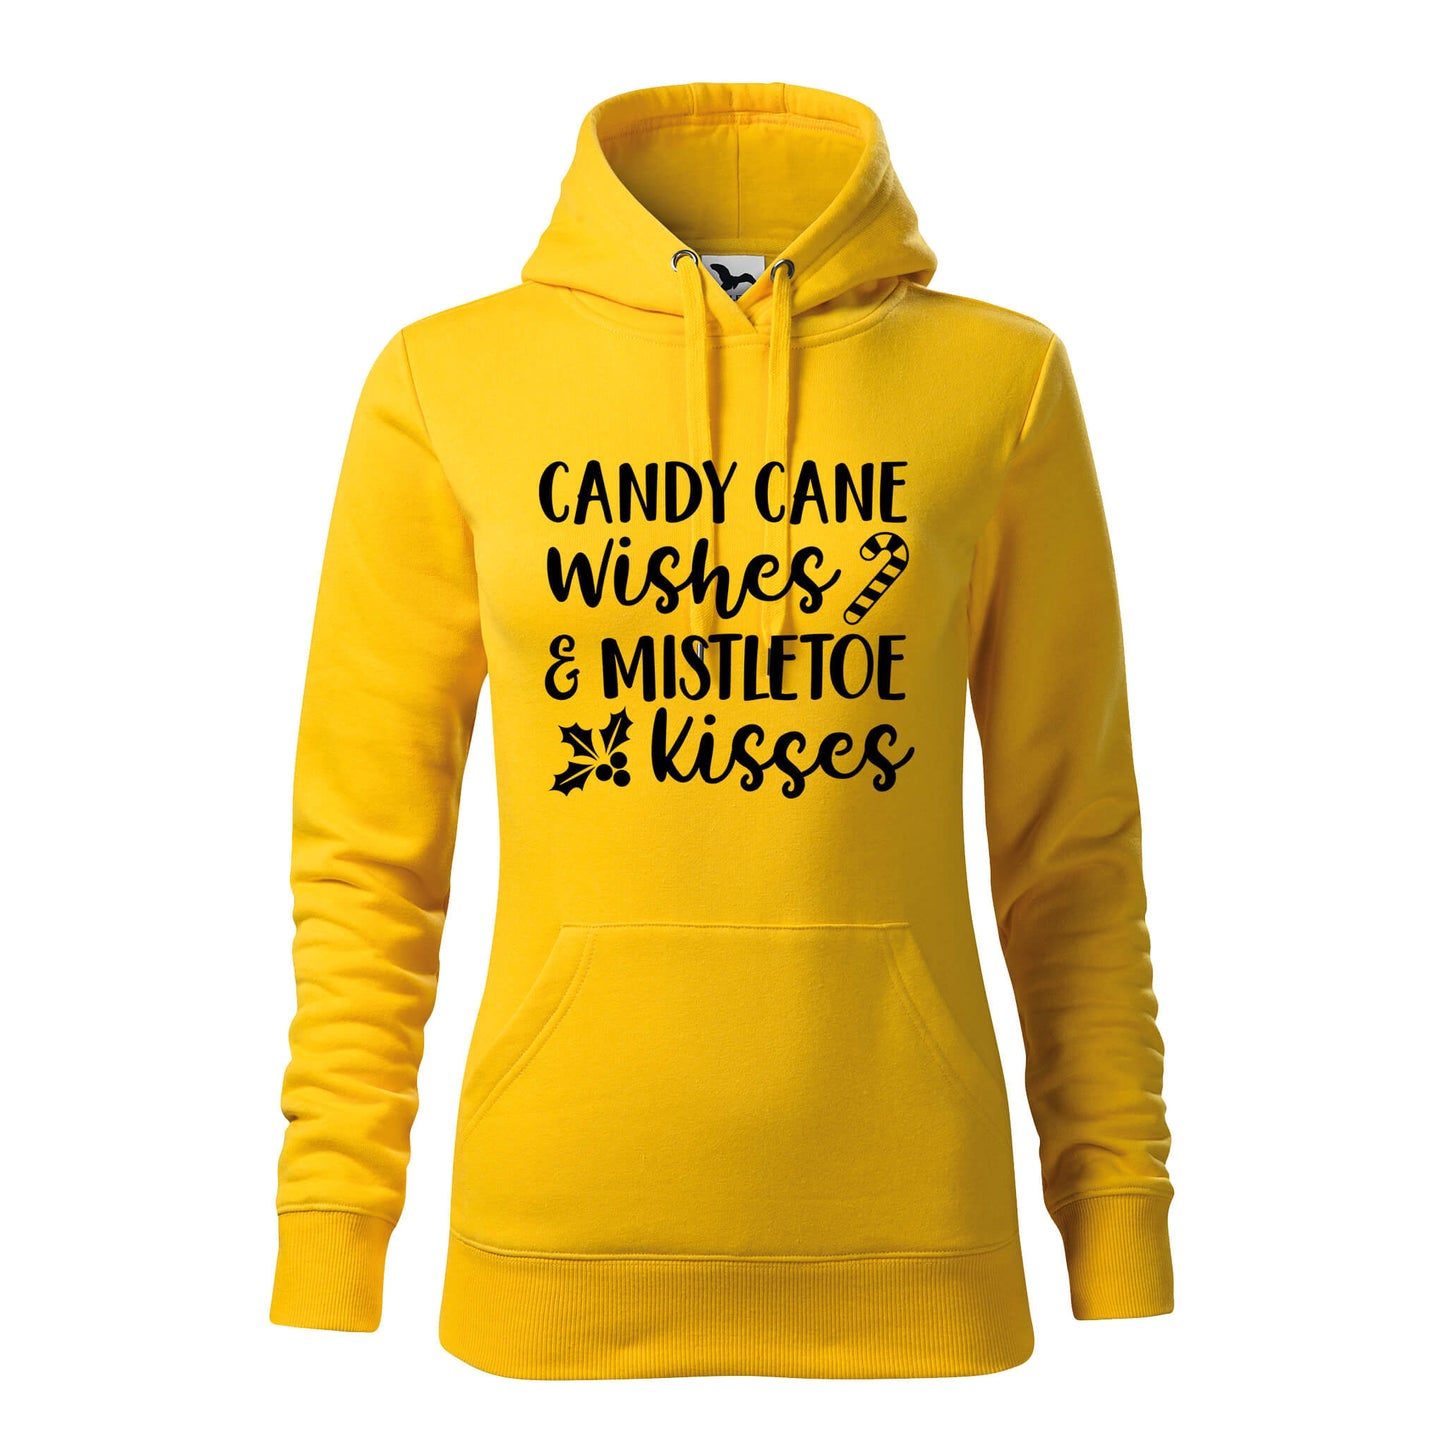 Candy cane wishes mistletoe kisses hoodie - rvdesignprint